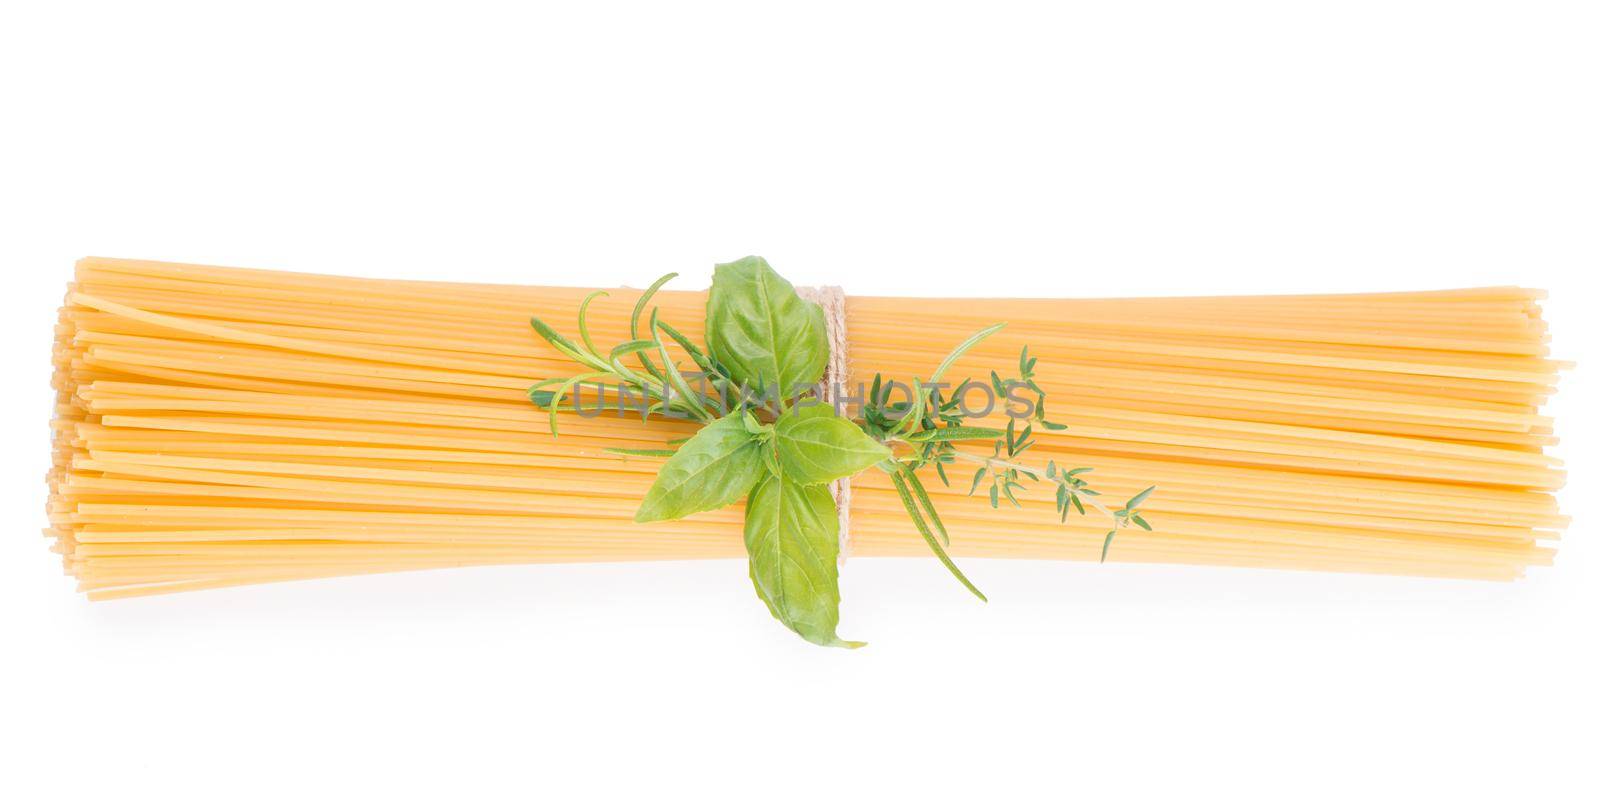 Spaghetti and basil isolated on white background by aprilphoto